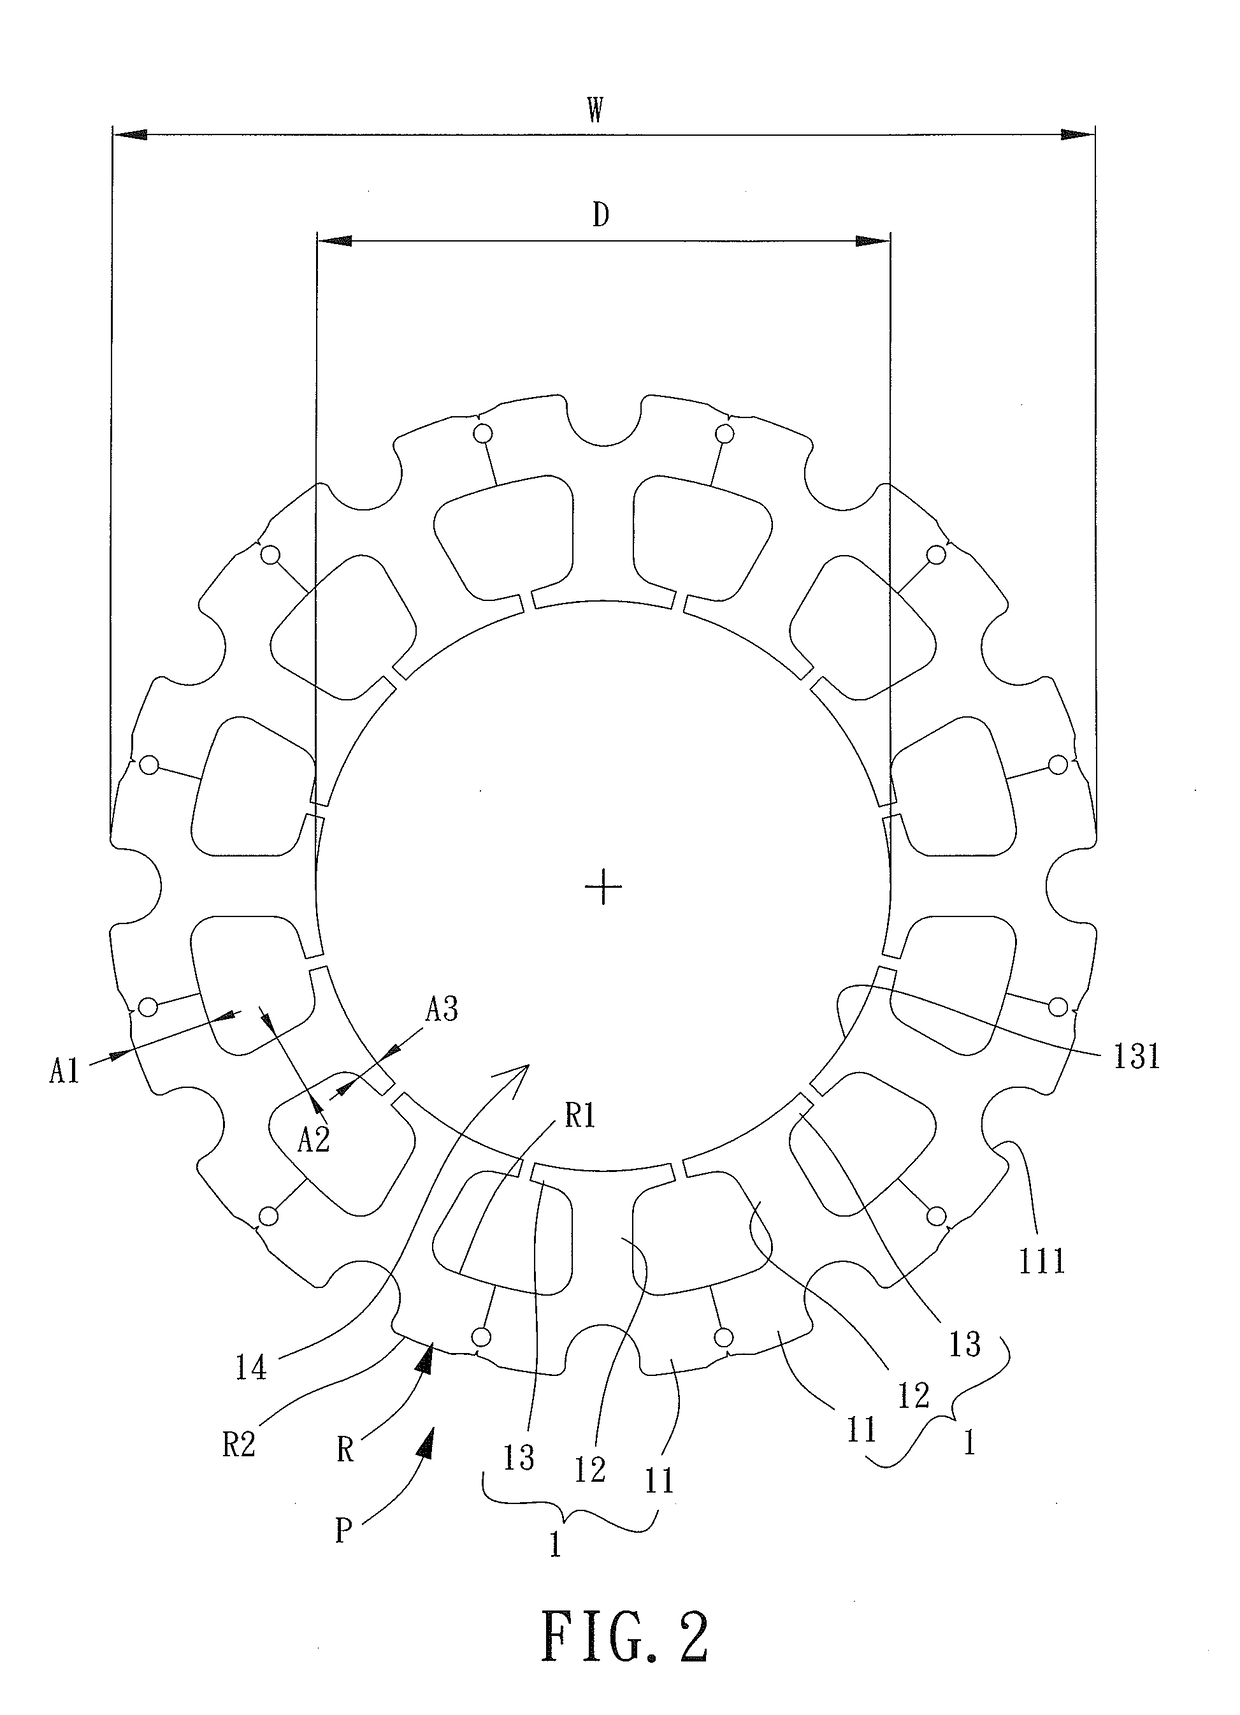 Silicon Steel Plate Used to Form a Stator of a Motor